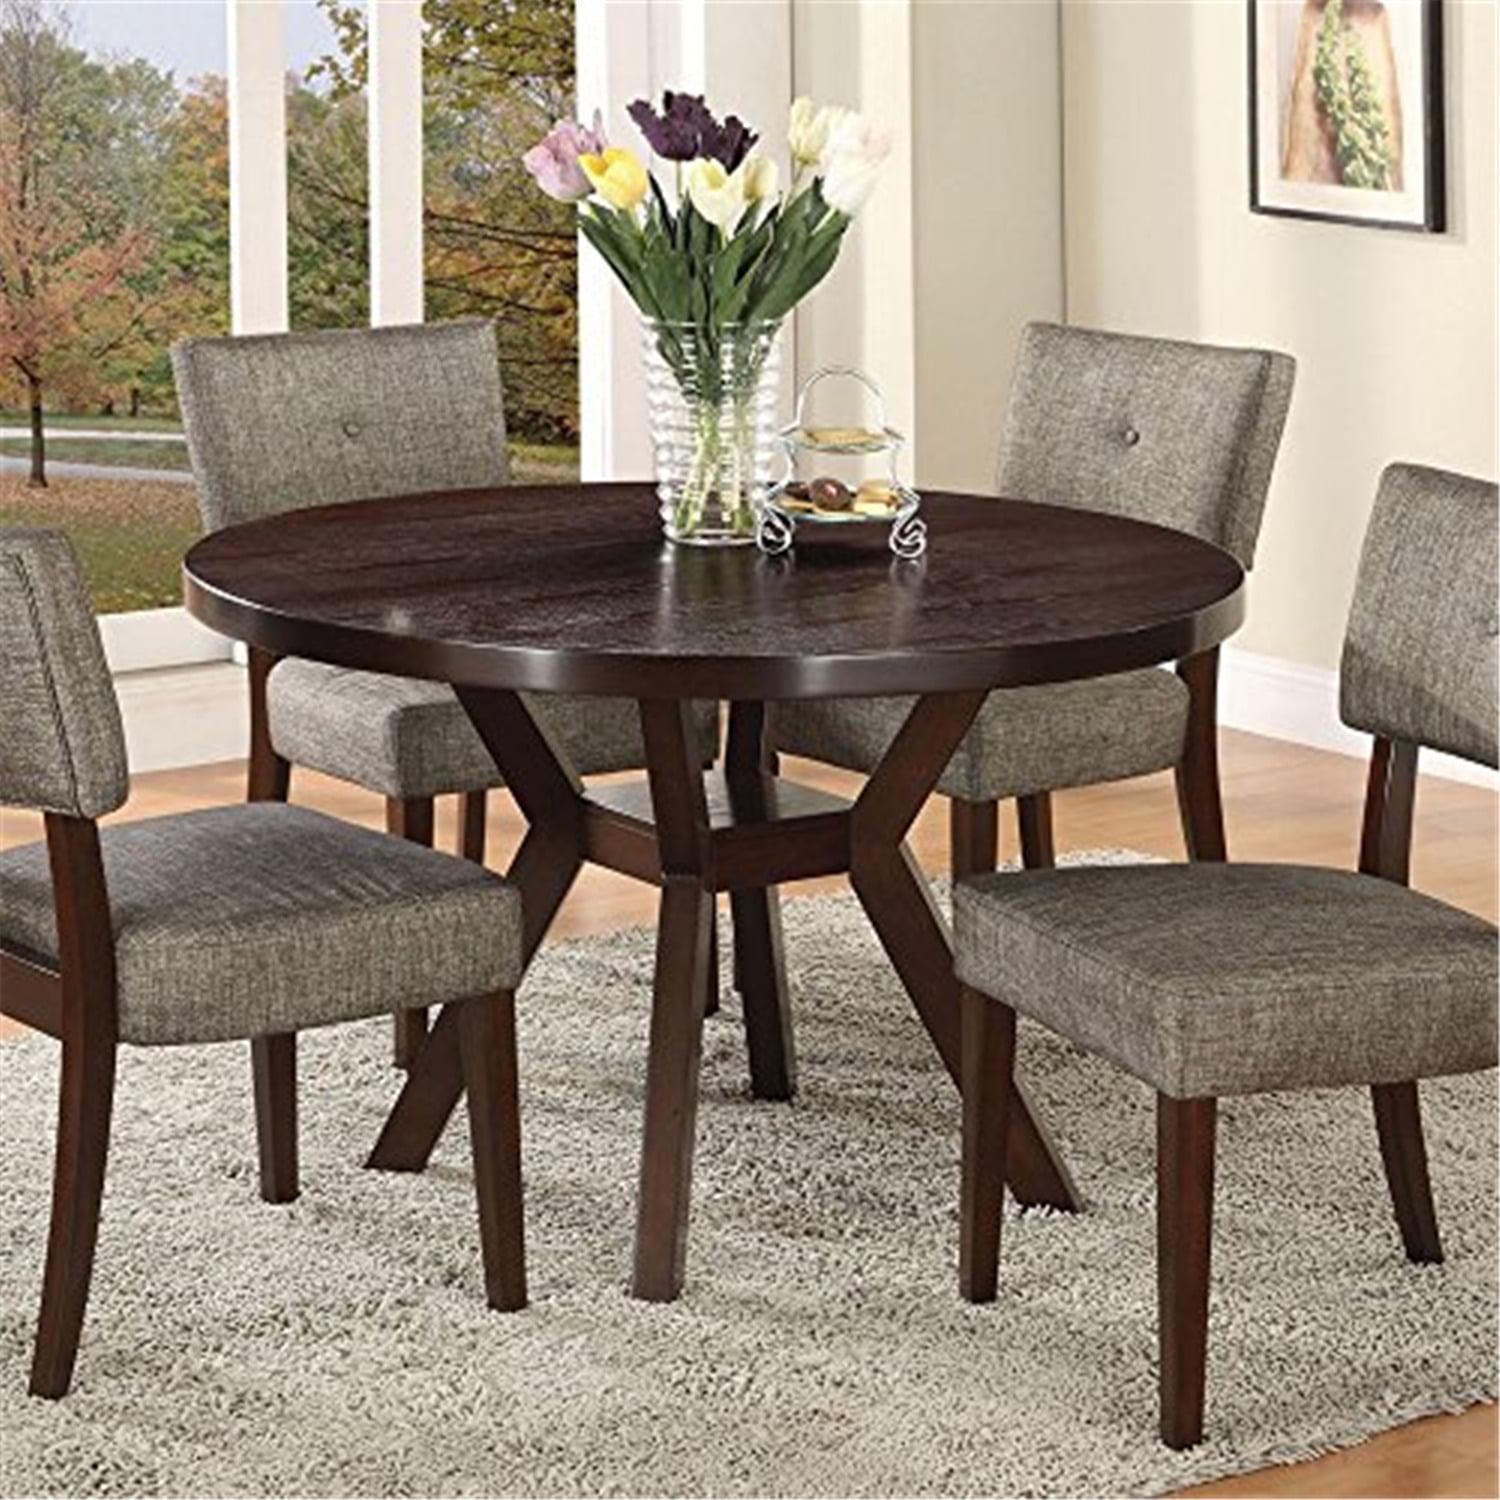 Espresso Finish Contemporary Round Wood Dining Table, Seats Four